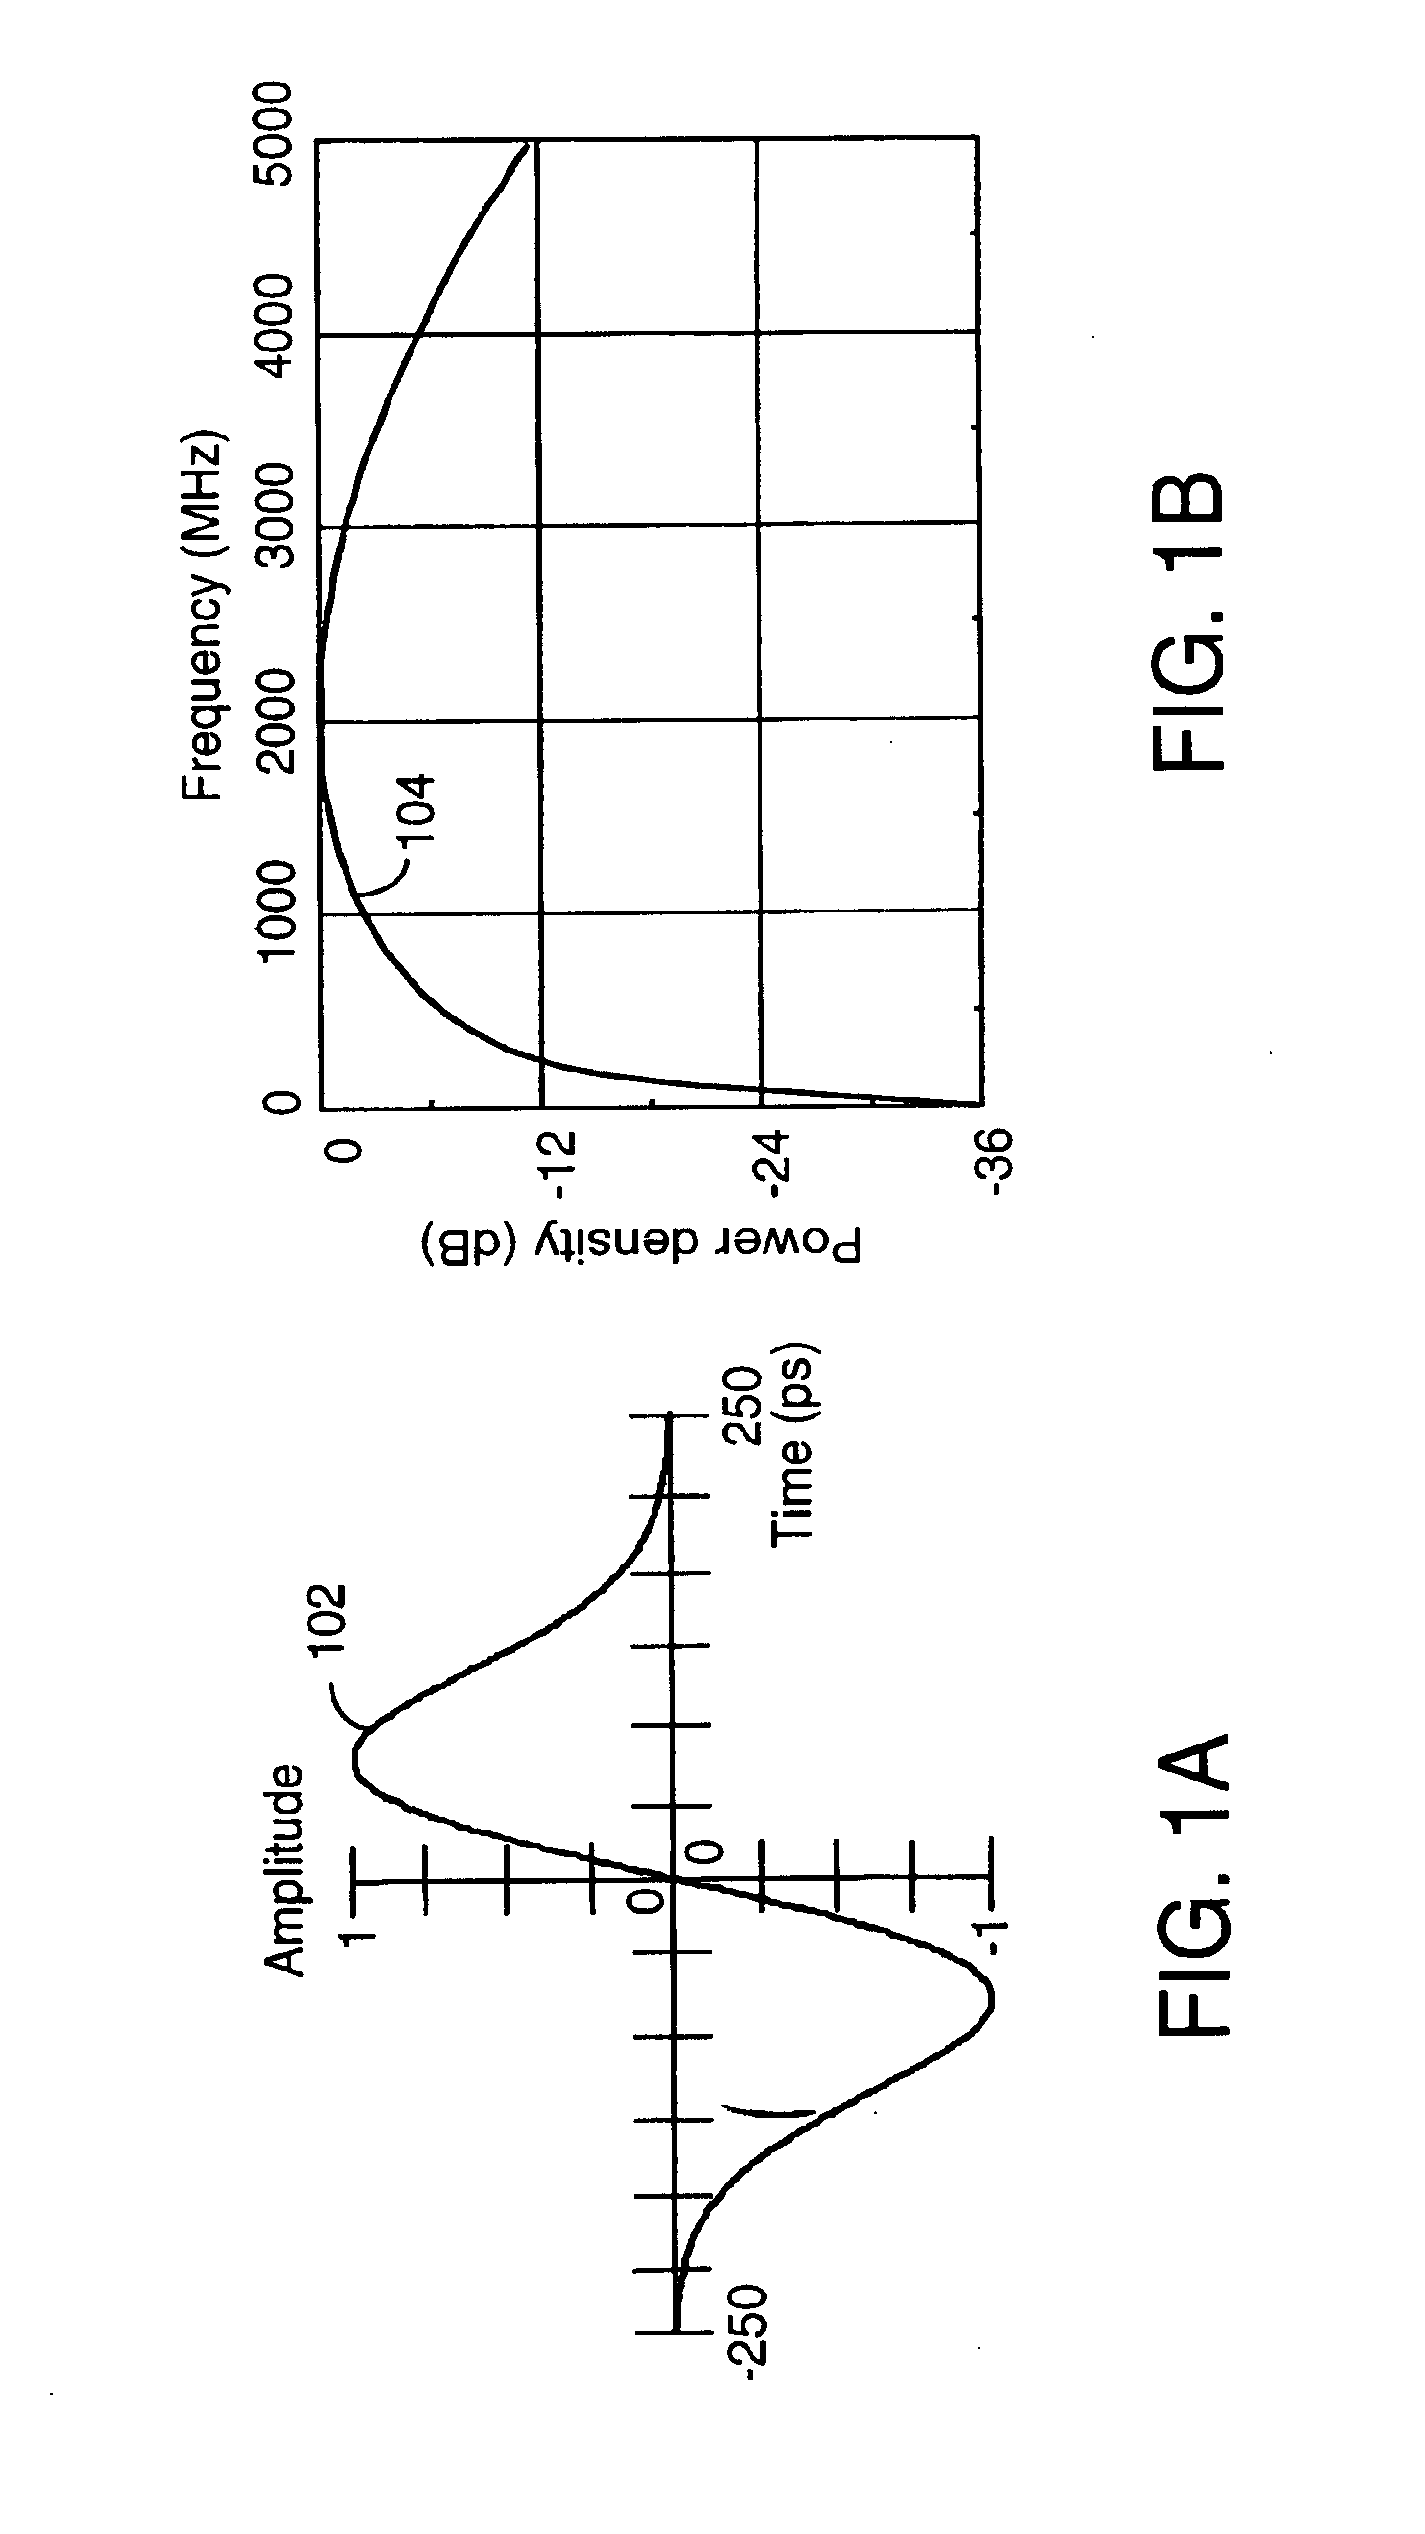 Apparatus, system and method for flip modulation in an impulse radio communications system